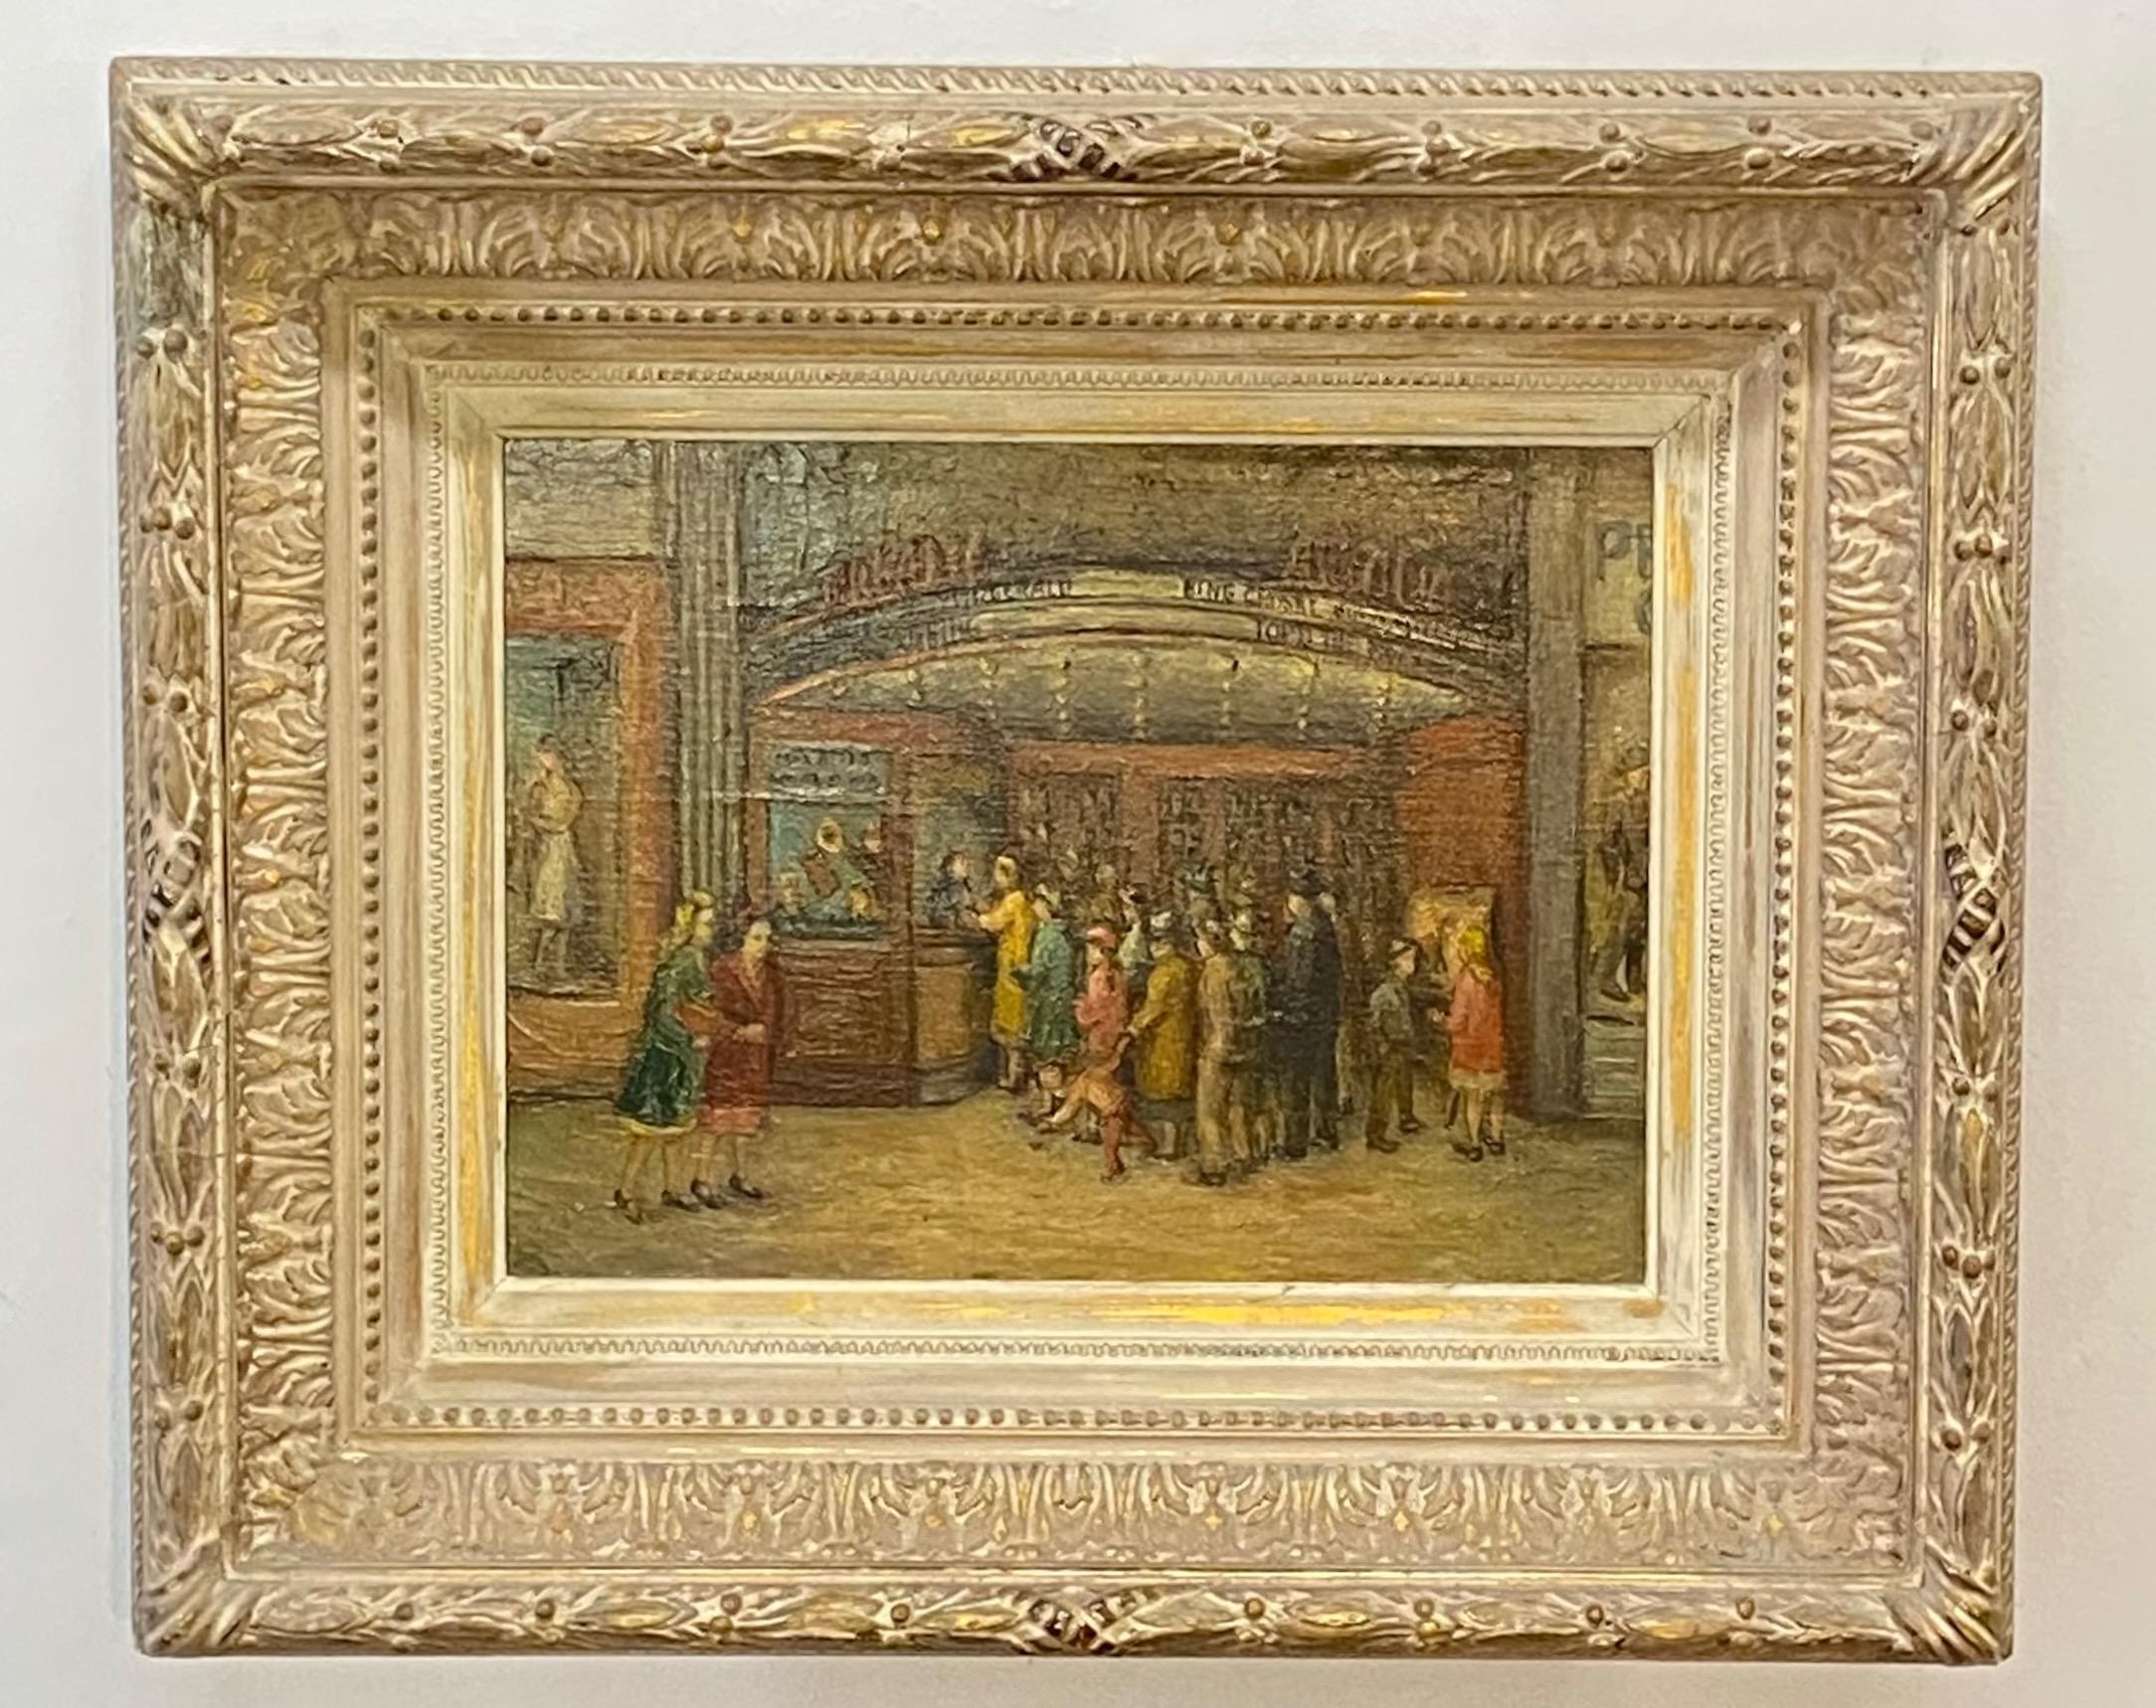 Street scene painting of figures outside of a theater, signed Helen L. Roberts.
Framed oil on canvas.
Helen L. Roberts (b.1884 - d.1994) was active/lived in United States. Helen Roberts is known for Streetscenes.
American, early to mid 20th century.
